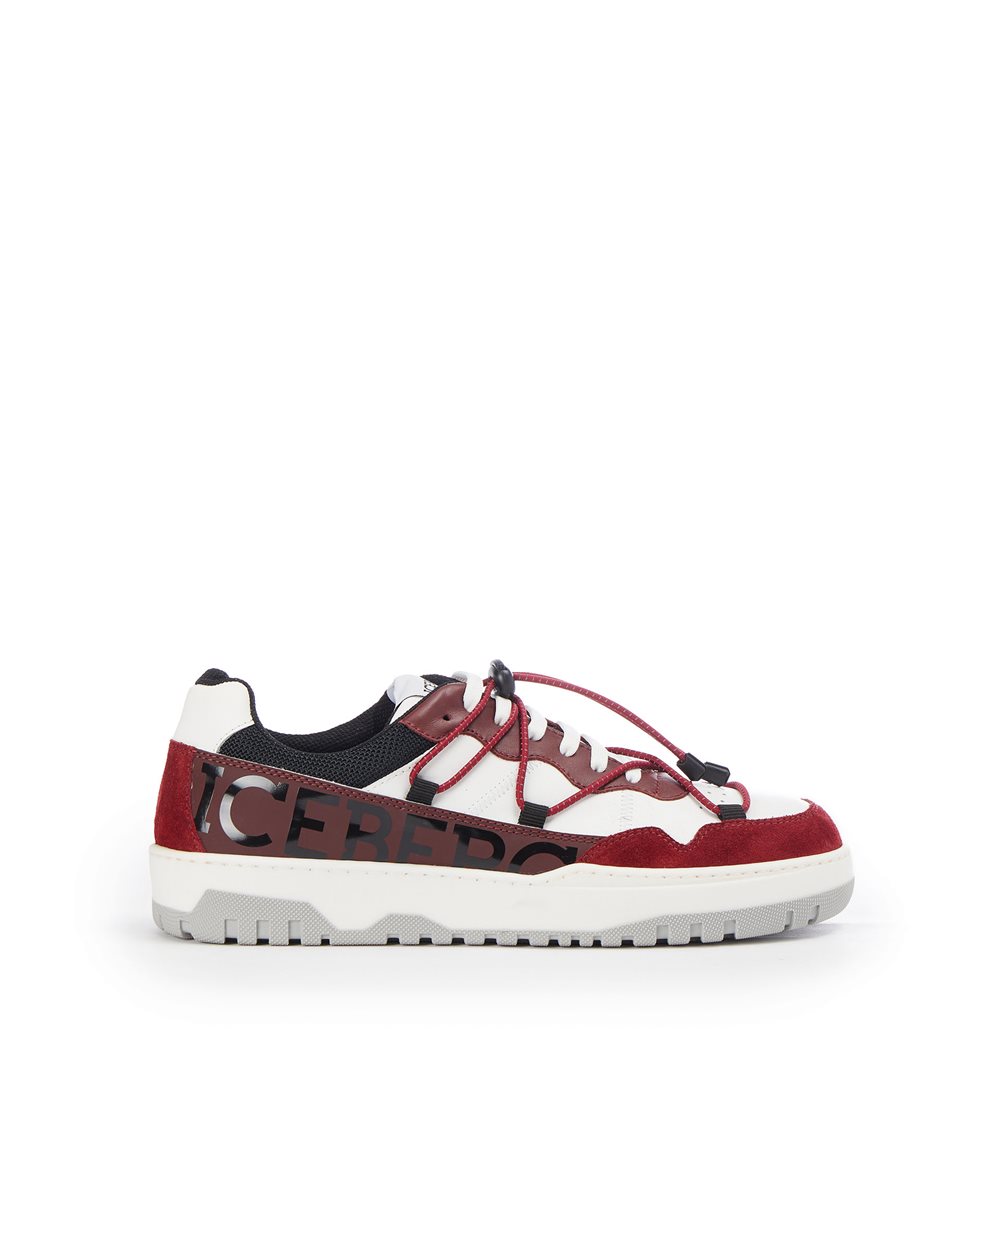 Nabuk and leather Okoro sneakers - ( PRIMO STEP IT ) PROMO SALDI UP TO 30% | Iceberg - Official Website